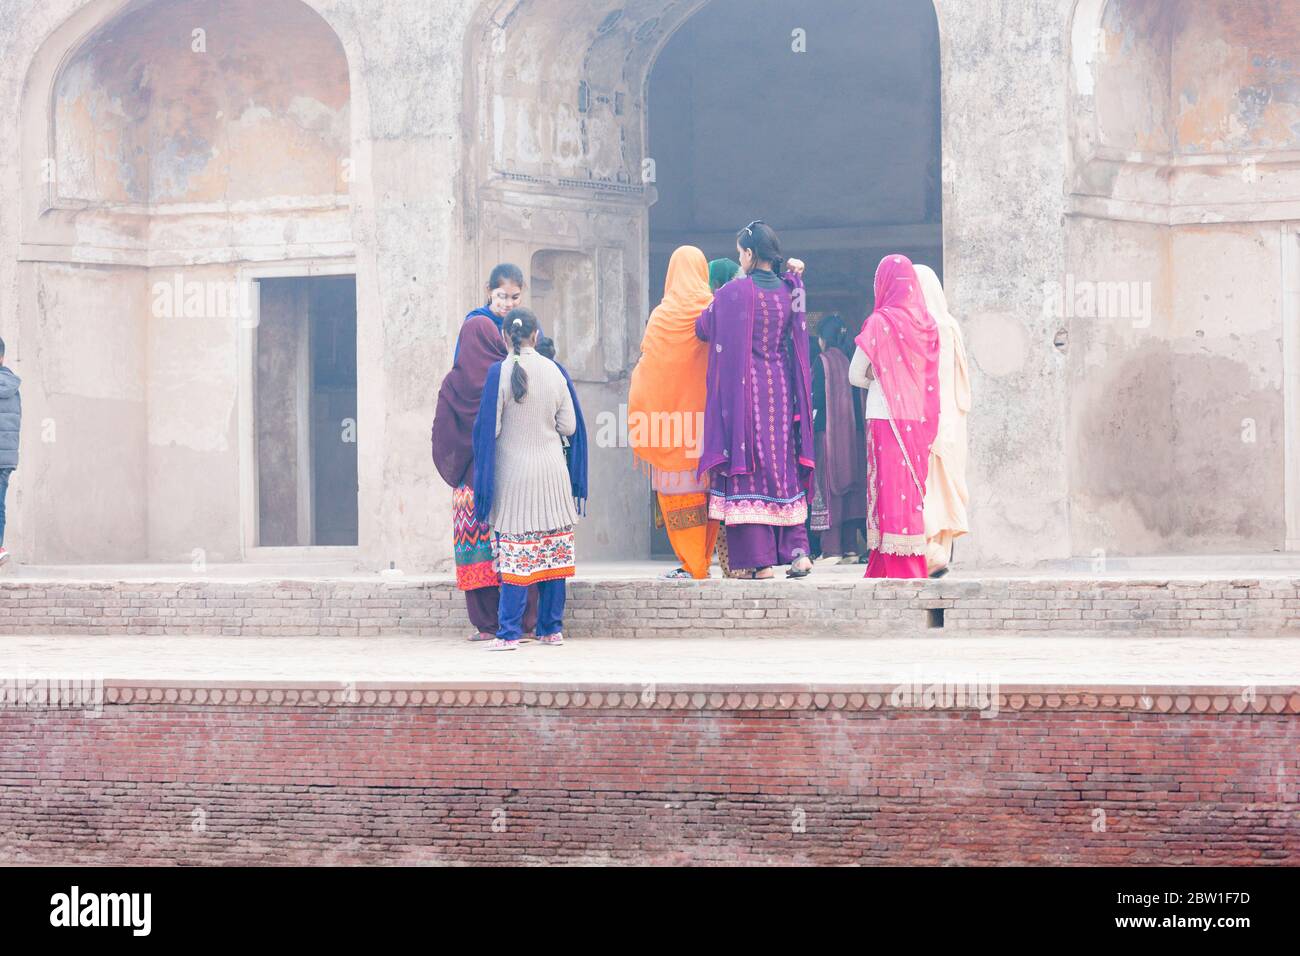 Women with pujab dress, Palace area of Lahore Fort, Citadel of Mughal Empire,  Lahore, Punjab Province, Pakistan, South Asia, Asia Stock Photo